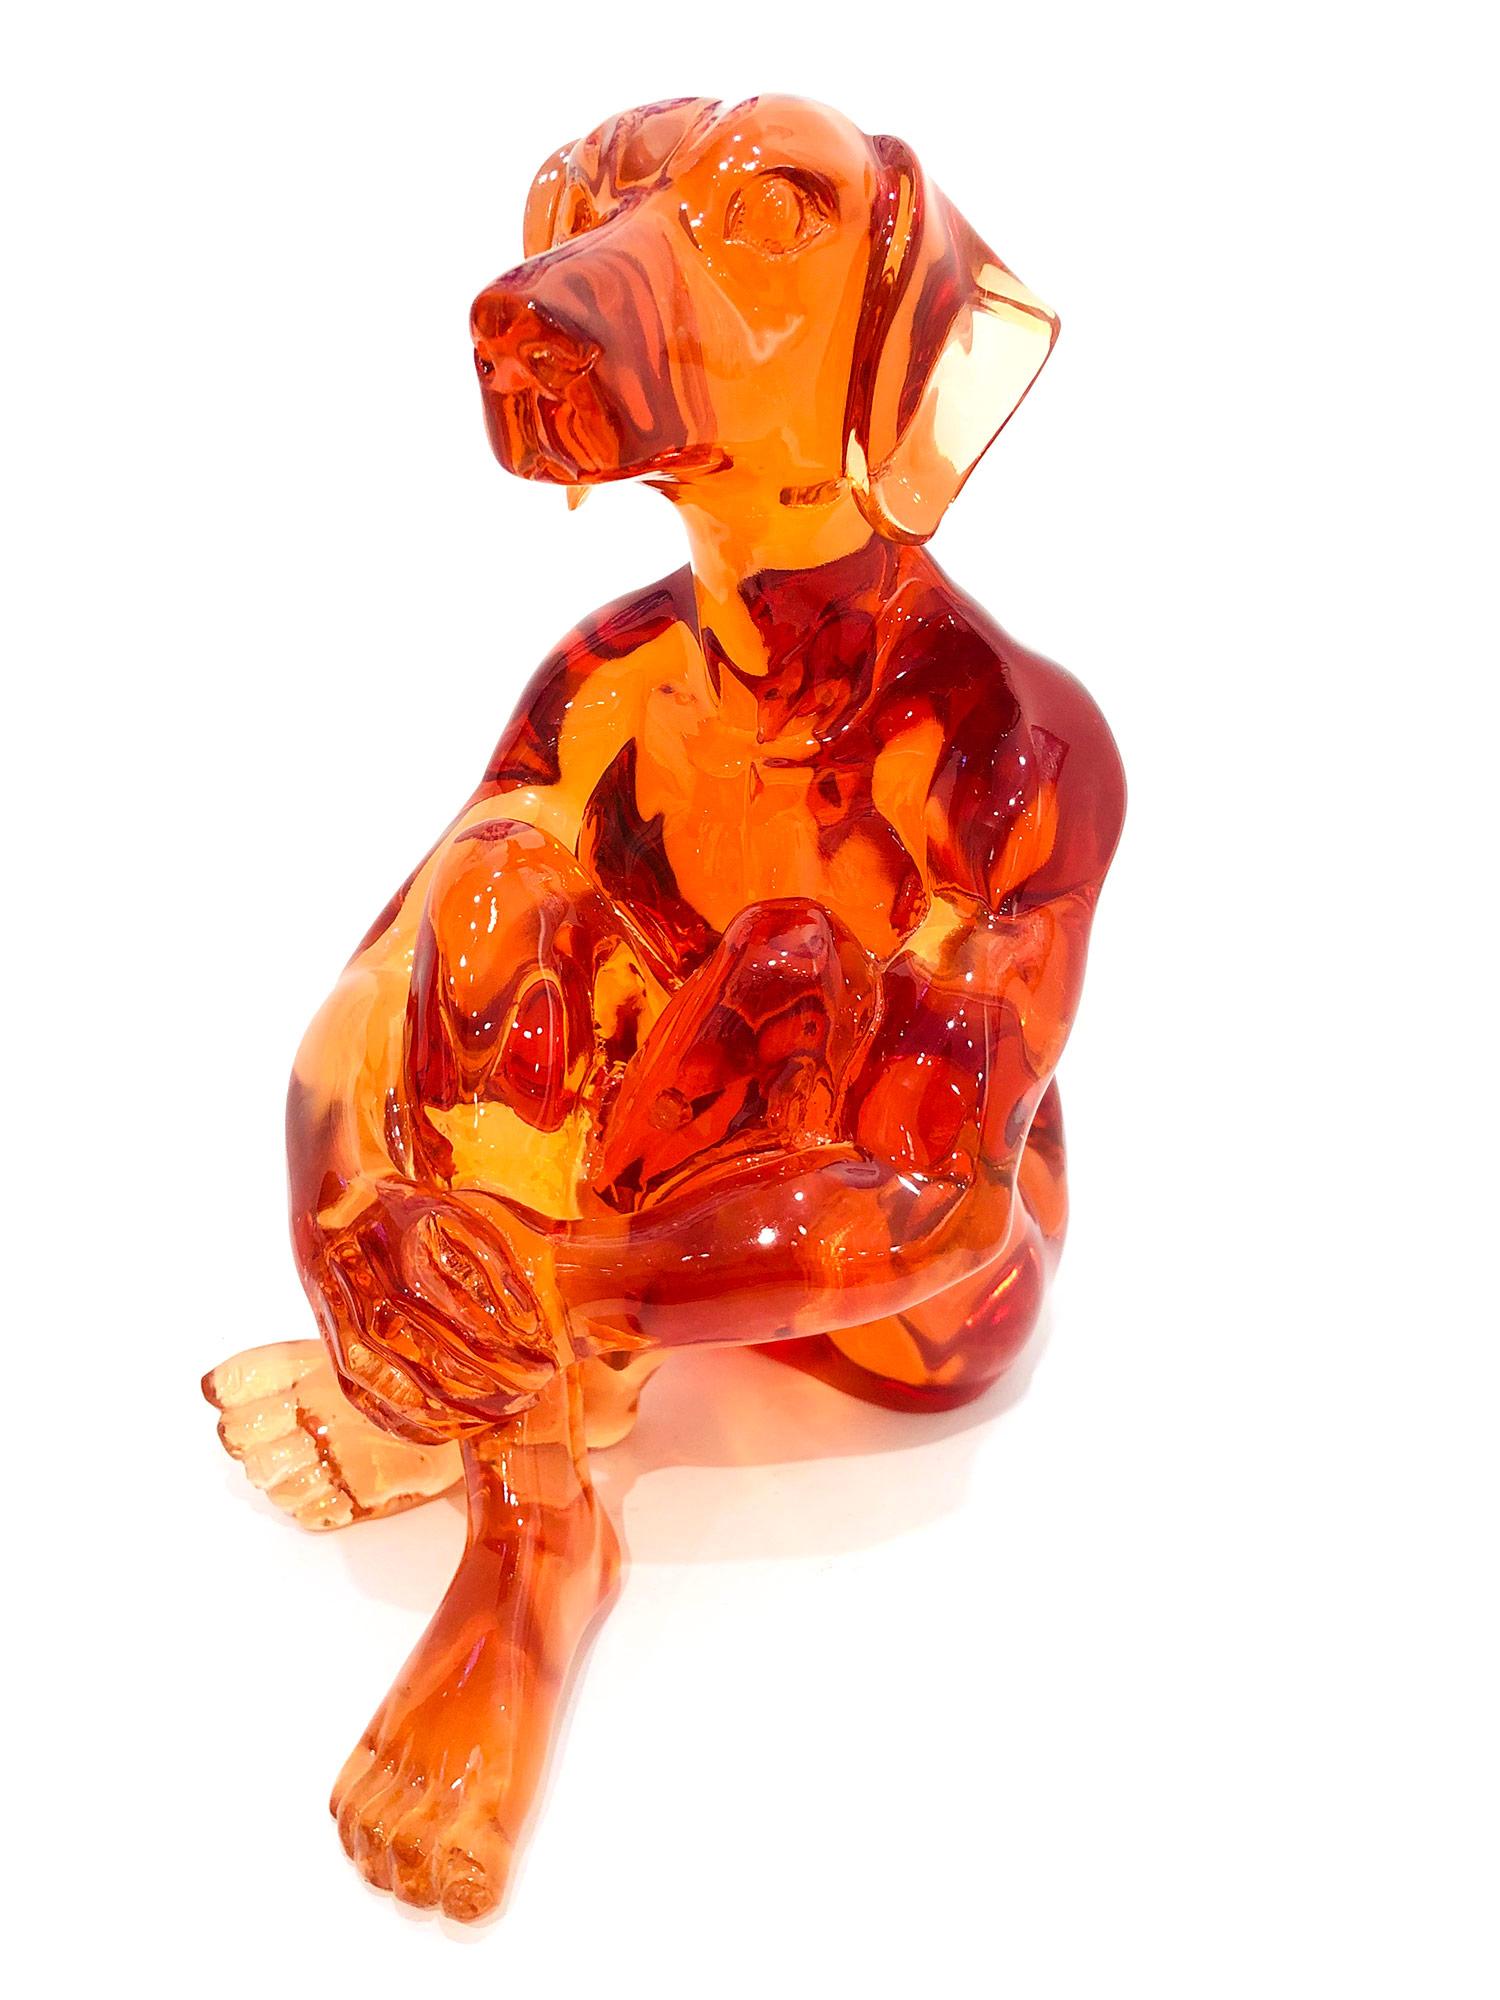 Gillie and Marc Schattner Abstract Sculpture – Lolly Dogman (Orange)